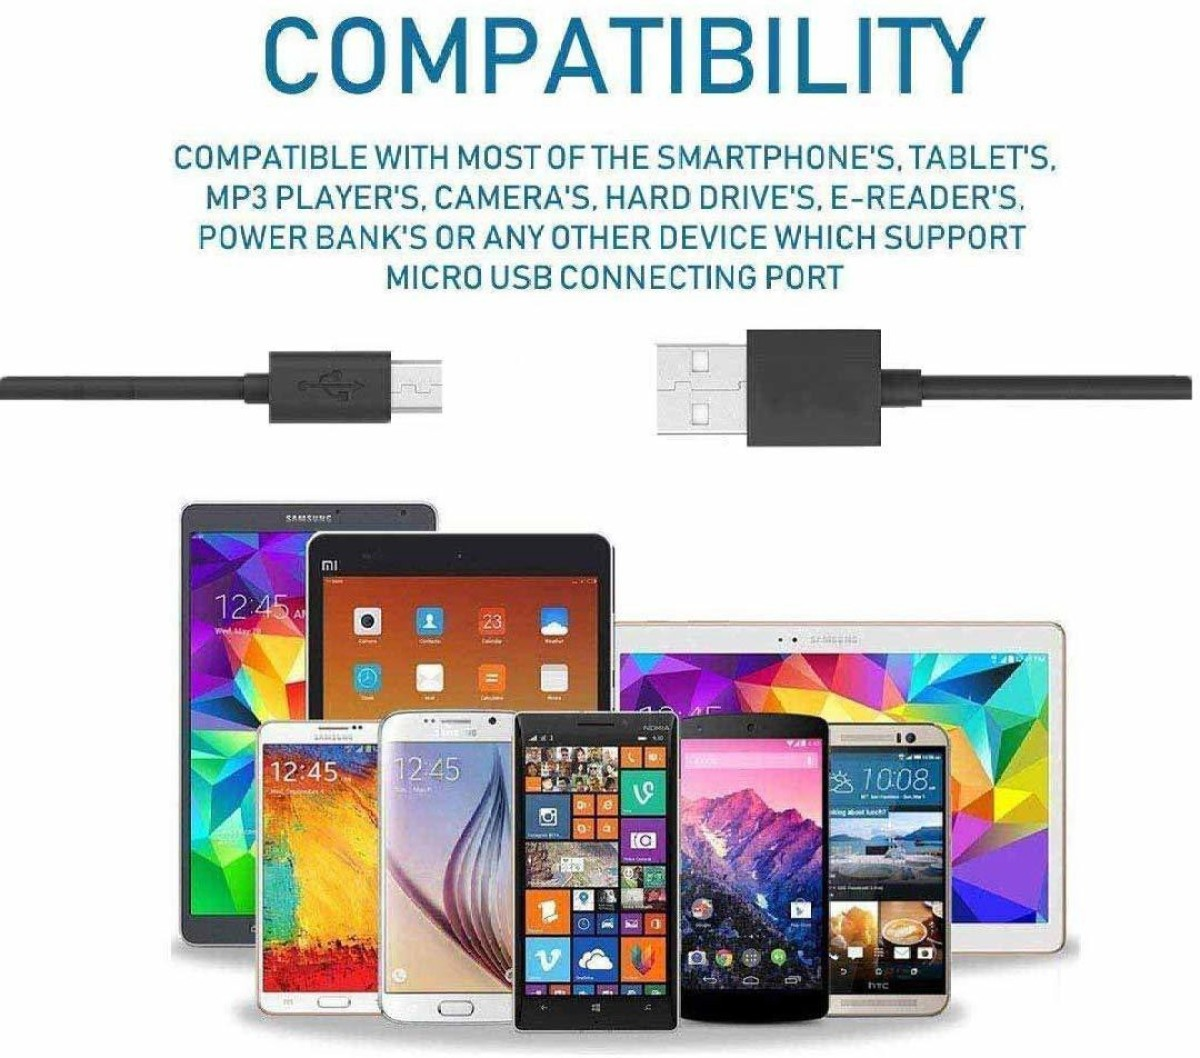 2.4A Fast Charger with Micro USB Data Cable, Compatible With Mi, Redmi & Other Devices